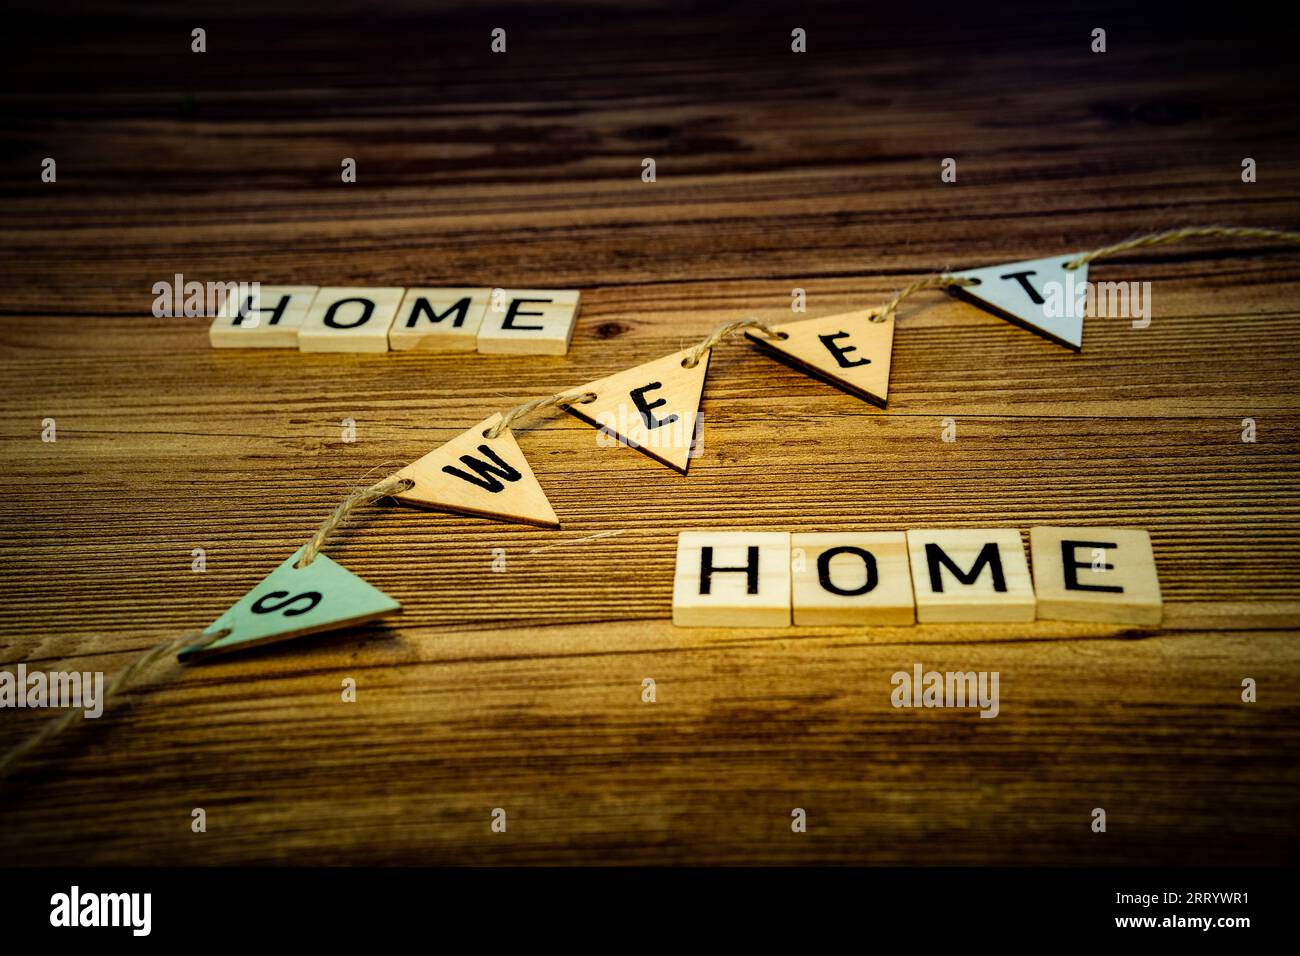 home sweet home in wooden letters on a wooden background Stock Photo